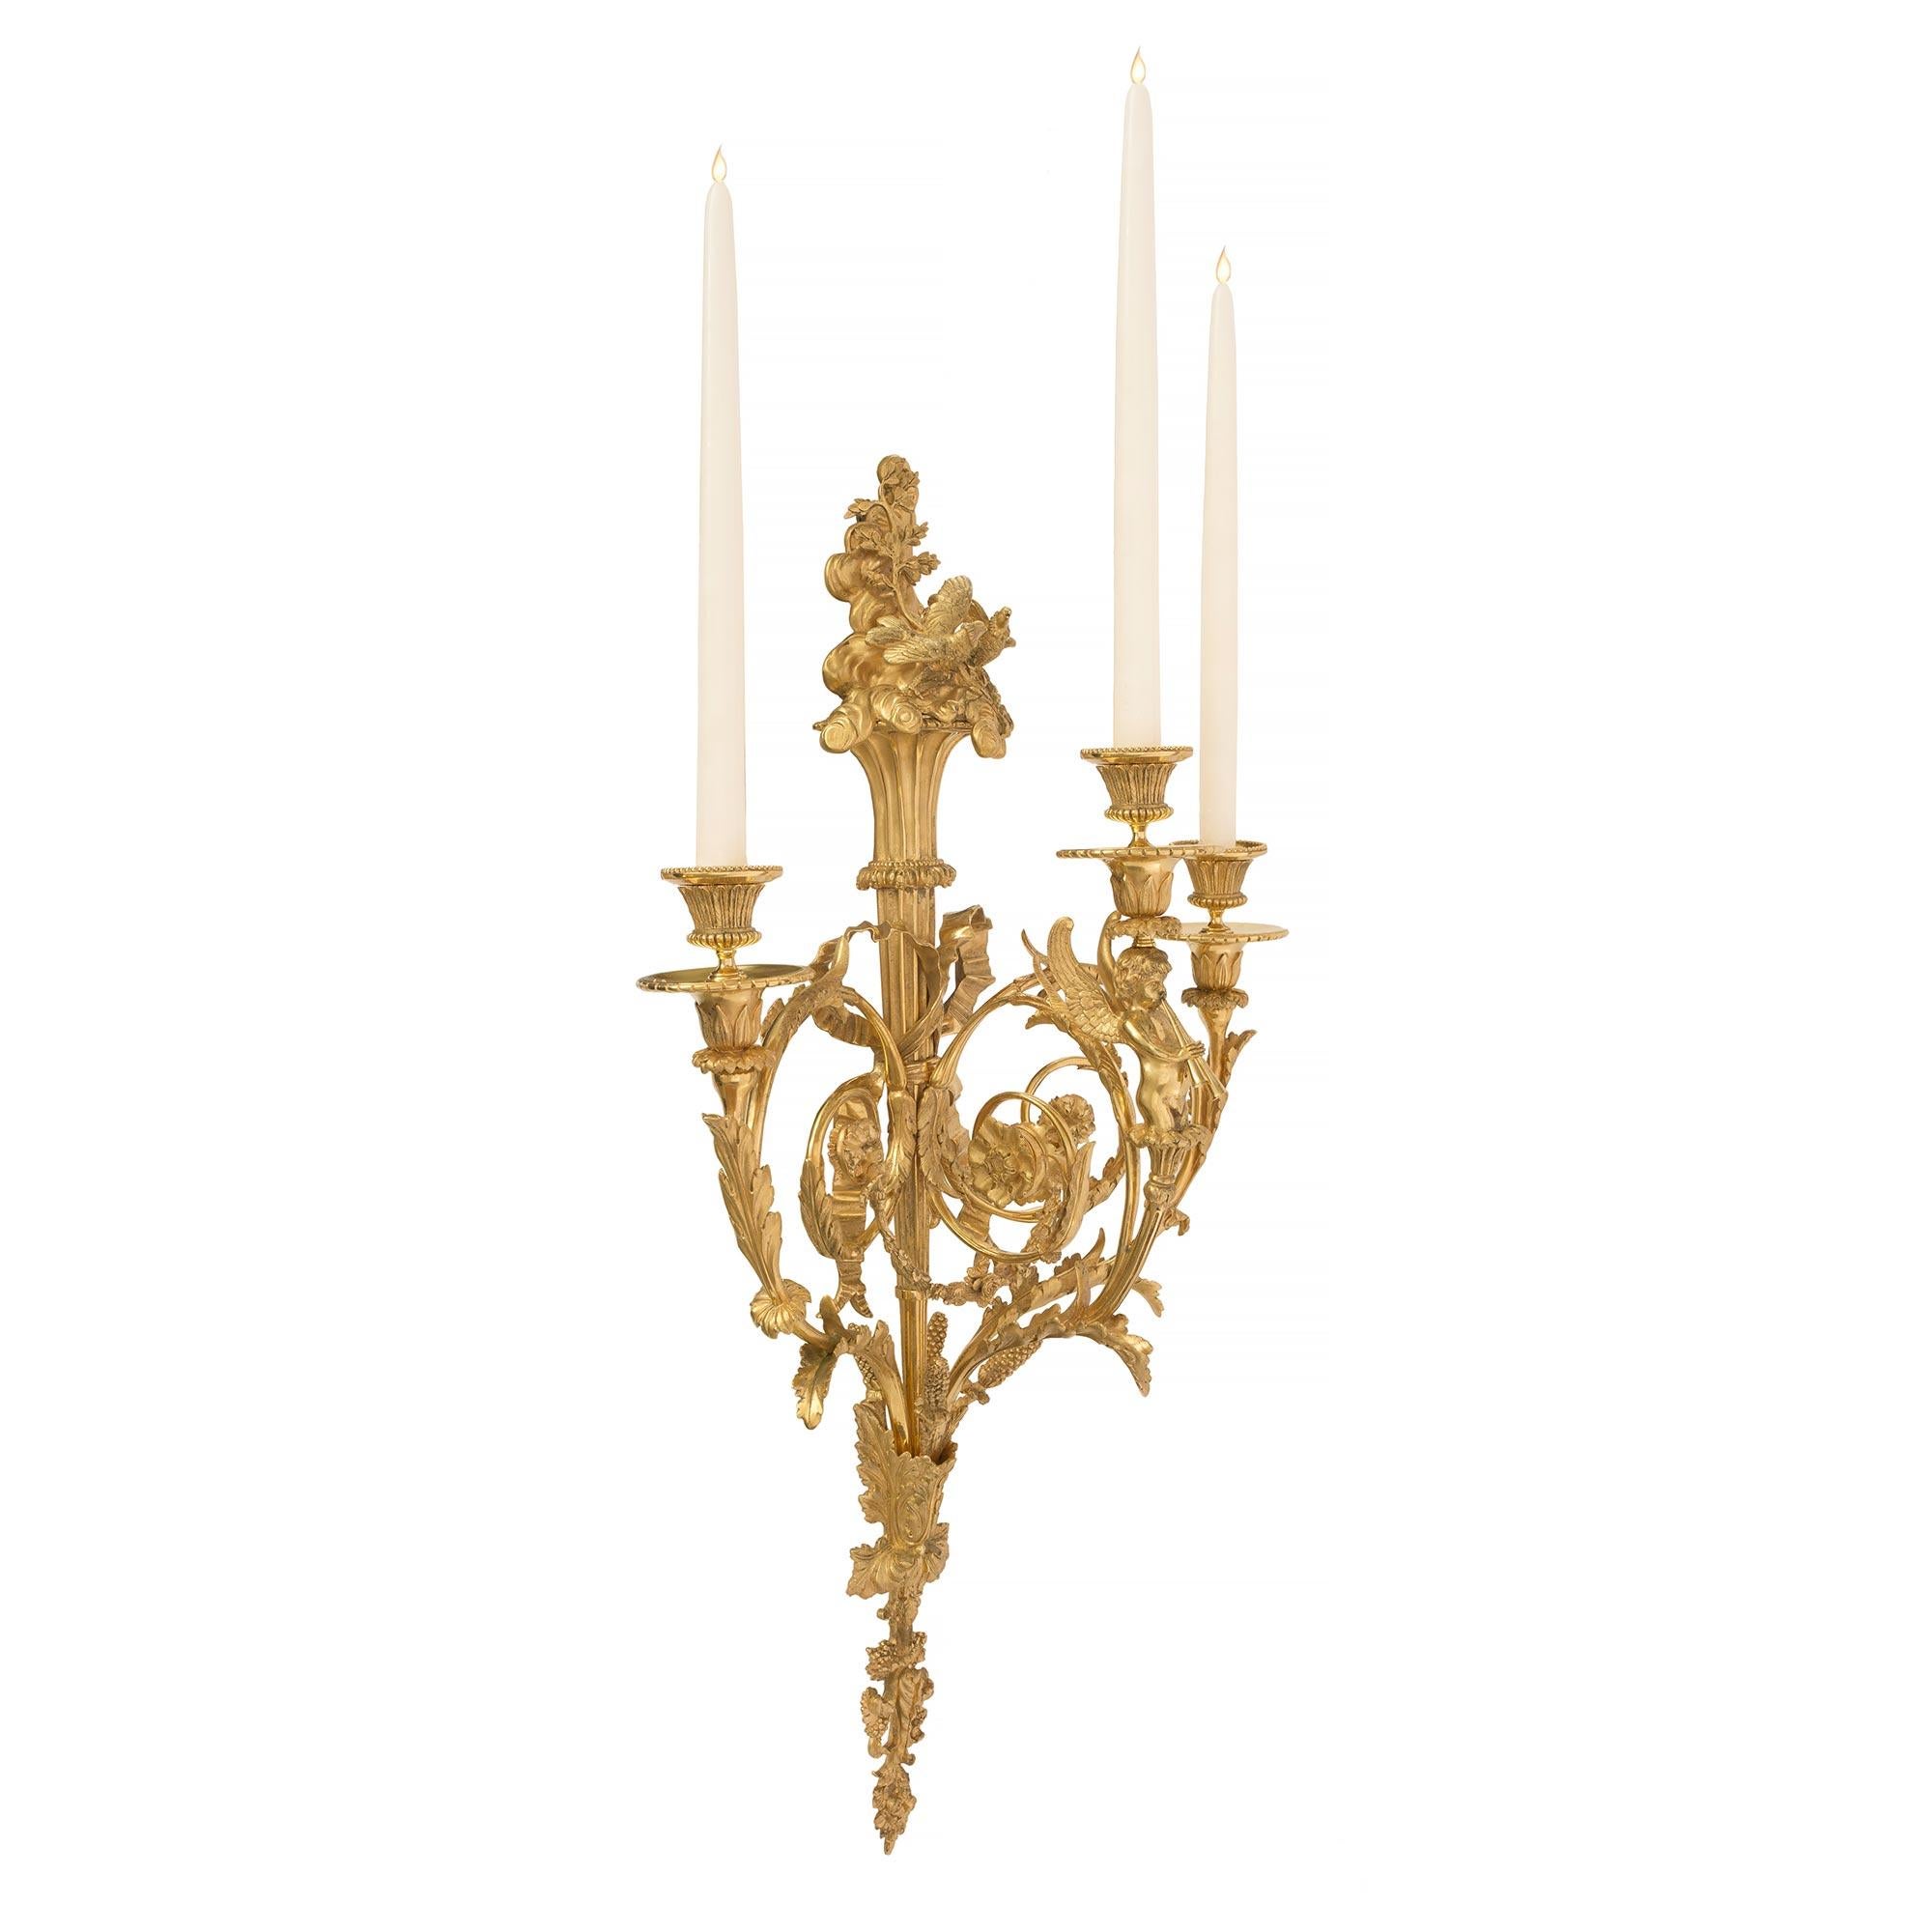 A very high quality and large scale pair of French mid-19th century Louis XVI style ormolu, three arm sconces, “Aux Tourtereaux”, possibly by Henry Dasson, attributed to Pierre-François Feuchère (1737-1823). Each has a bottom pierced finial with